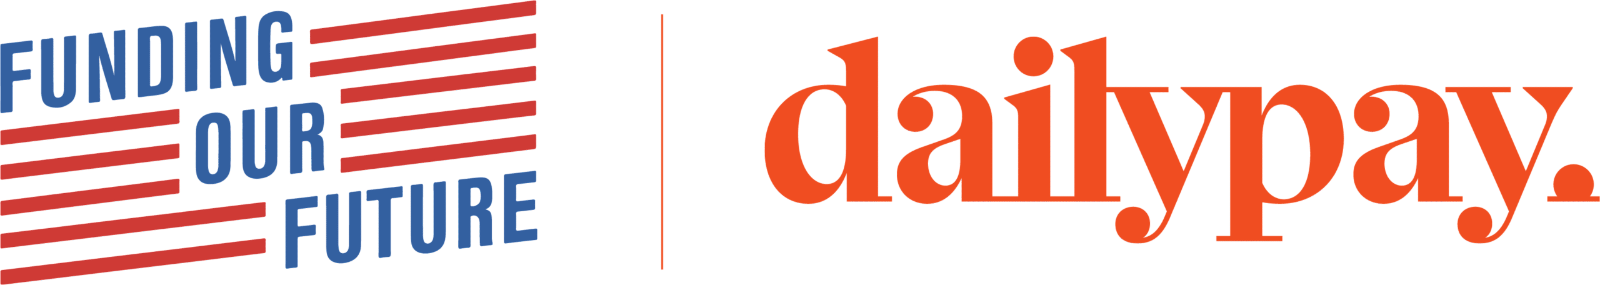 The image shows the logo for "Funding Our Future" in blue and red text, with horizontal red lines to the right. To the right of this logo is a vertical line separating it from the "dailypay" logo, which is written in bold, orange lowercase letters. The background is transparent.